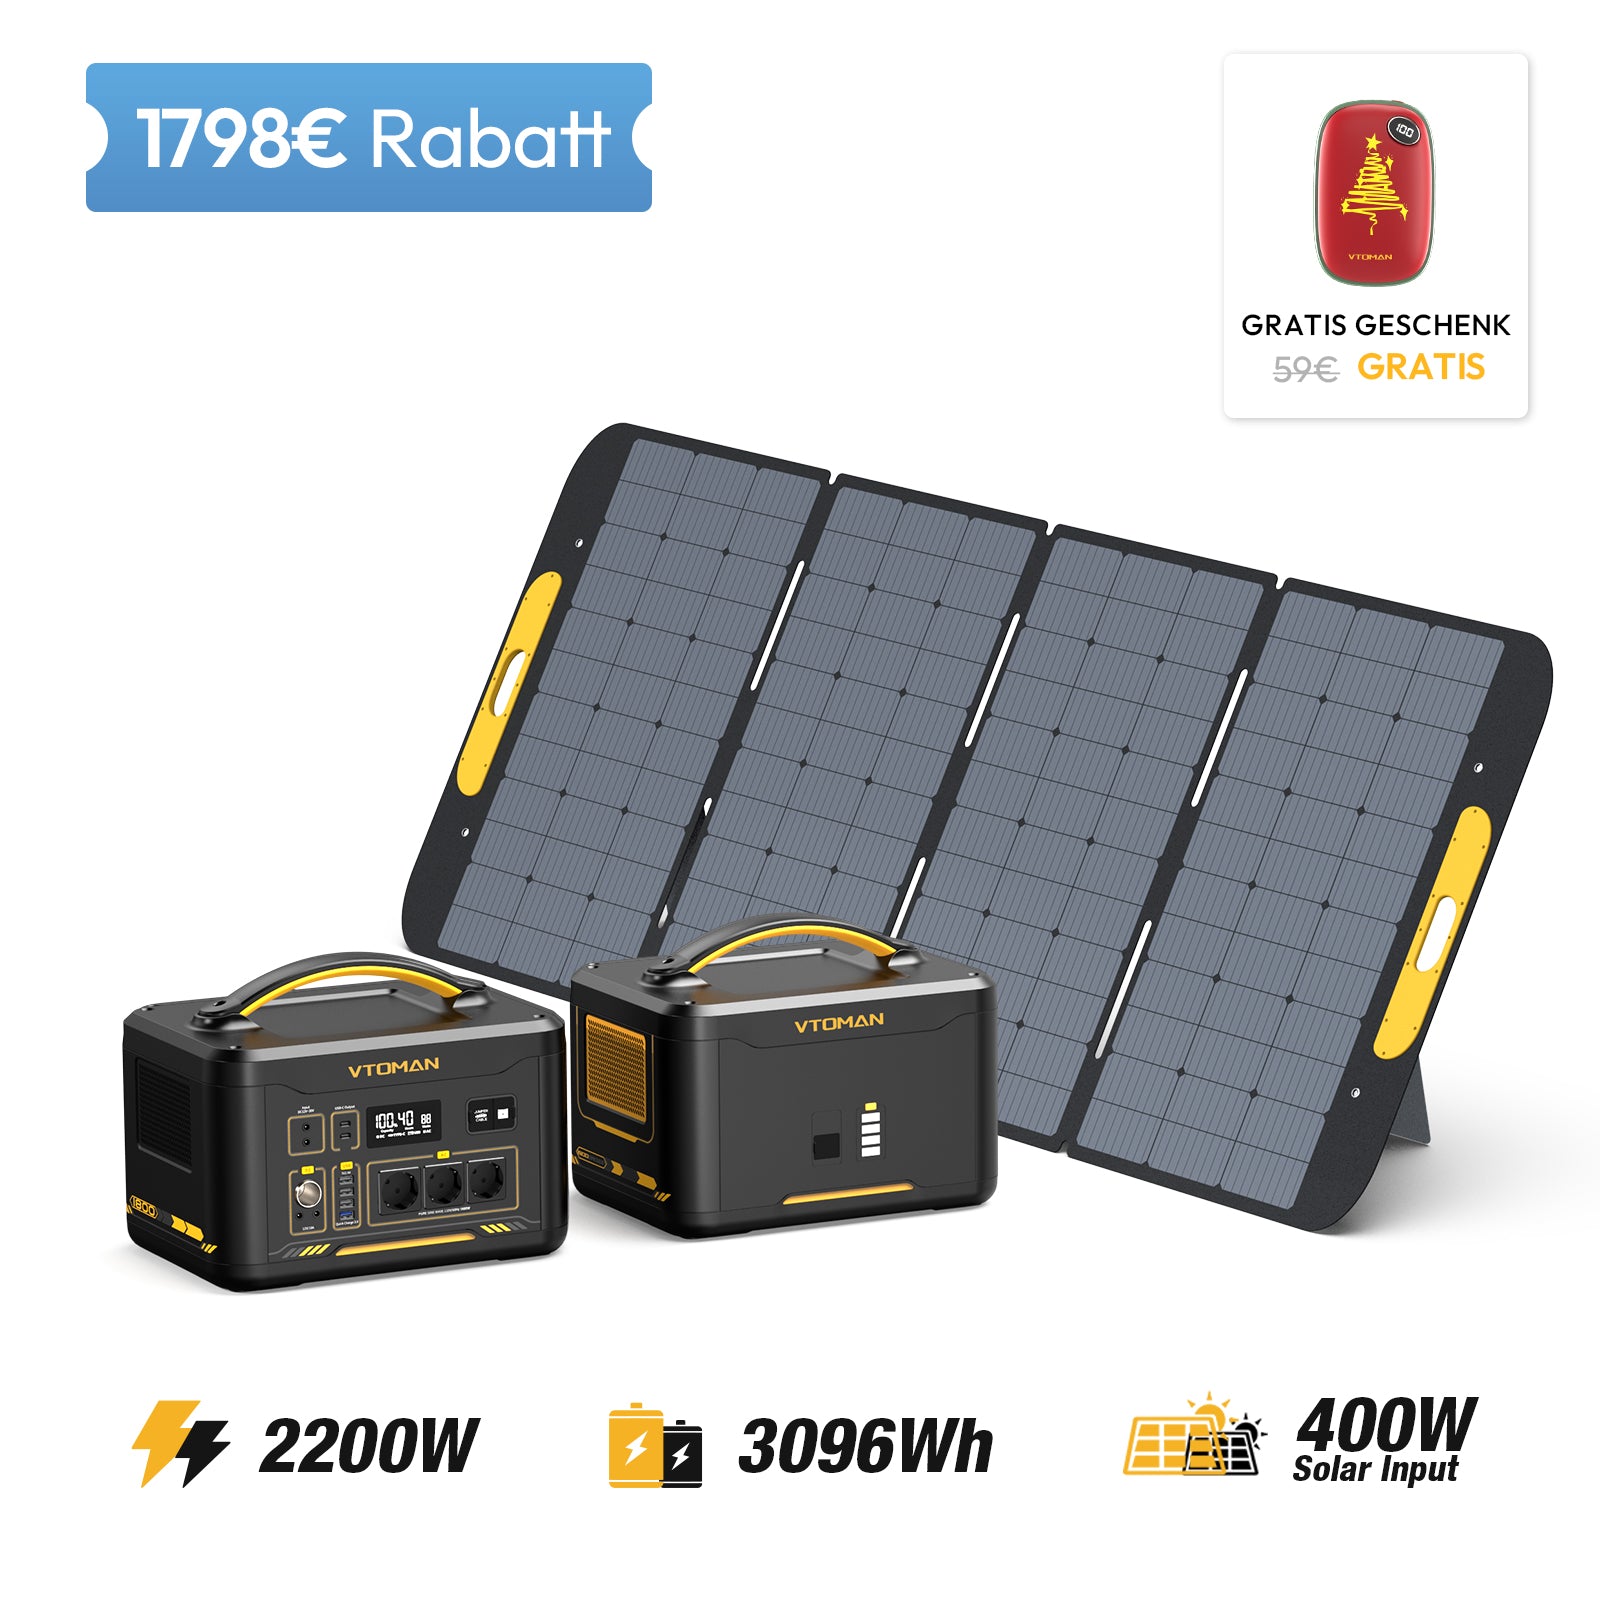 Jump 2200W/3096Wh 220W Solargenerator